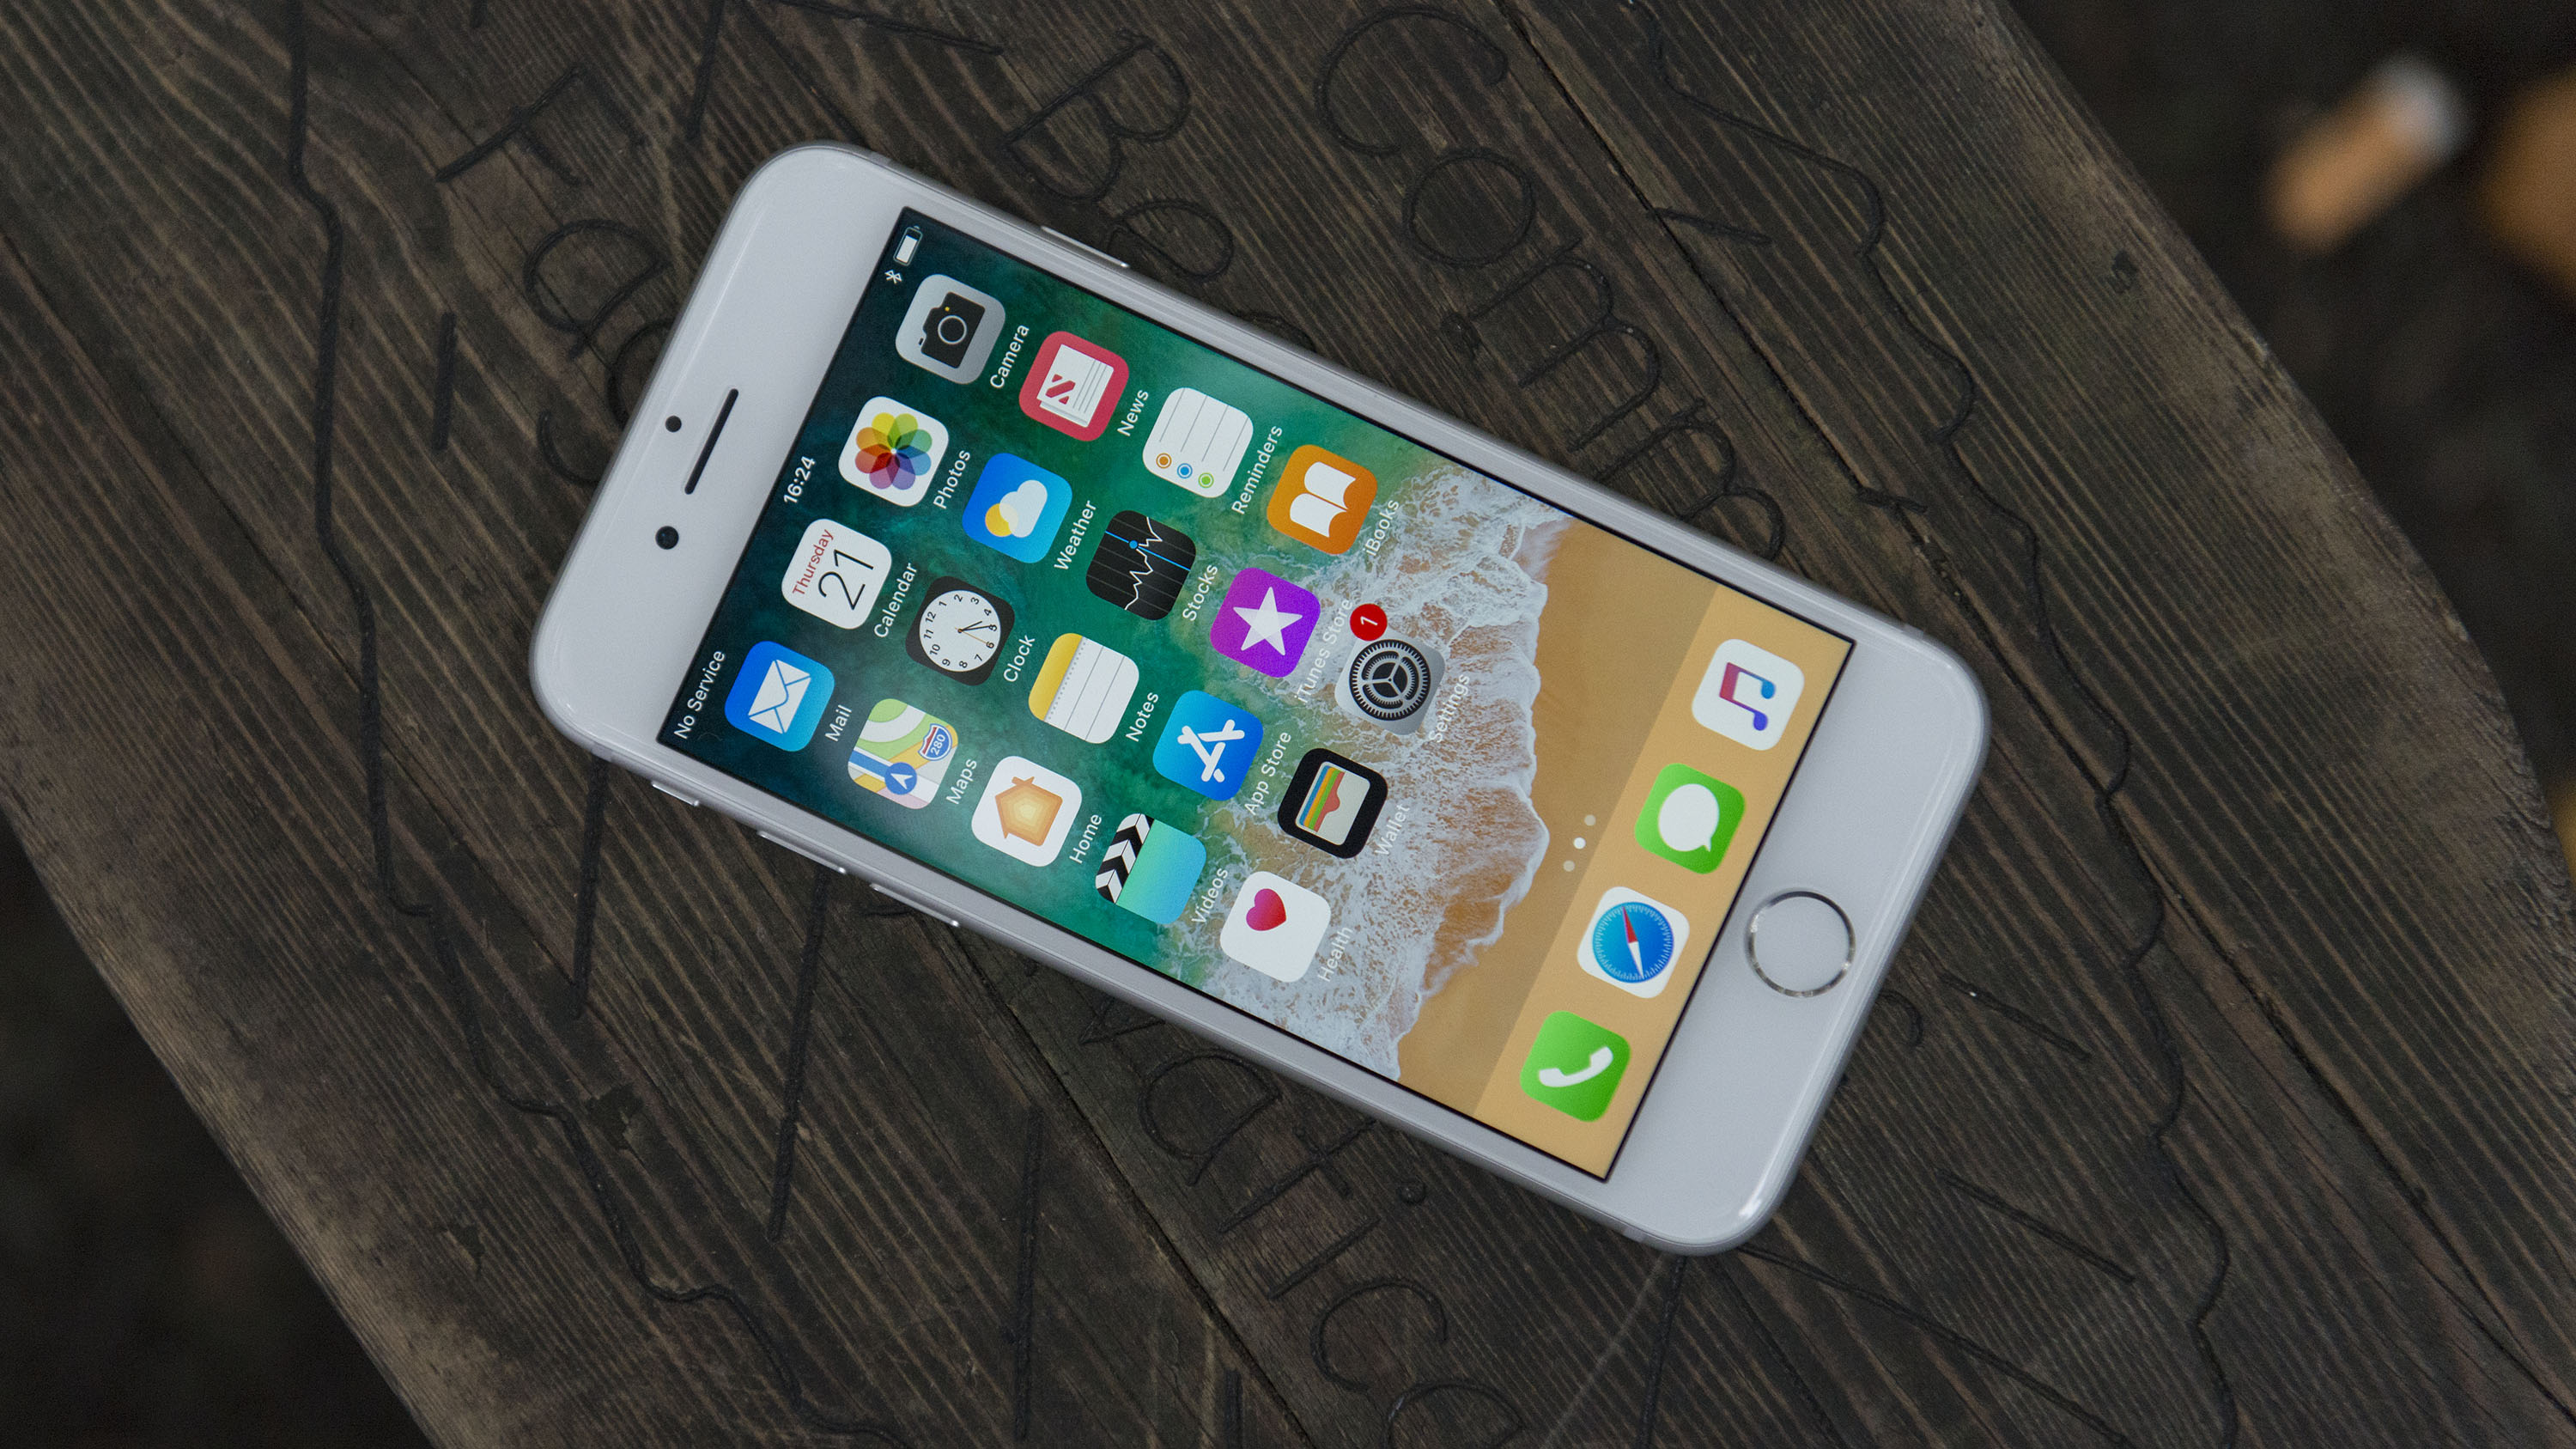 How to reset an iPhone: our guide to restarting or factory